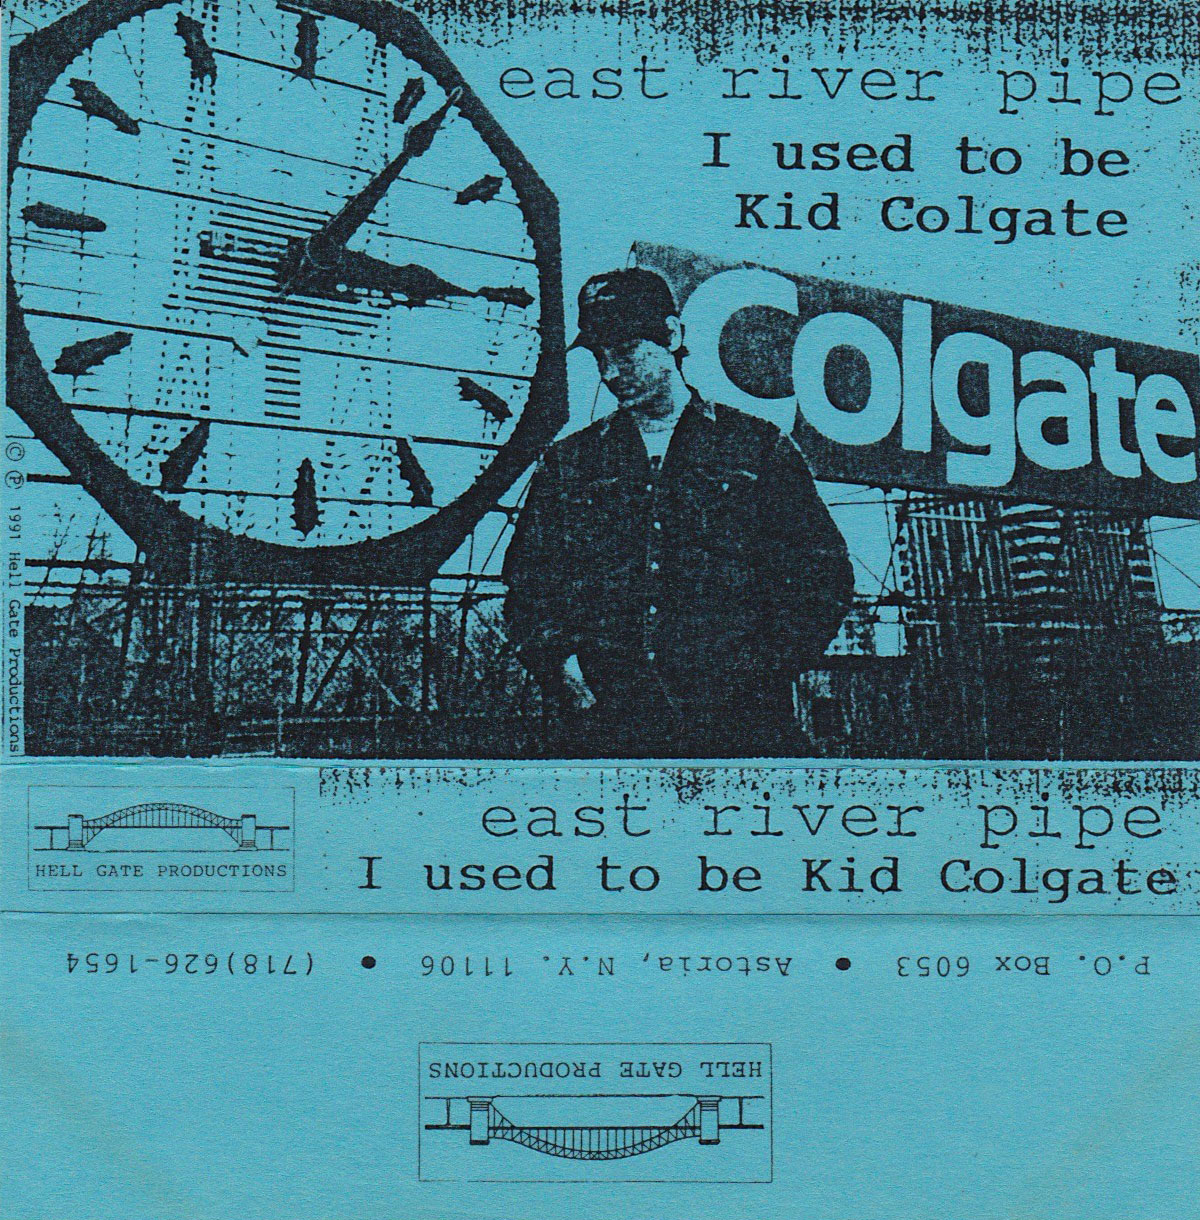 East River Pipe: I Used To Be Kid Colgate, 1991 [cover]